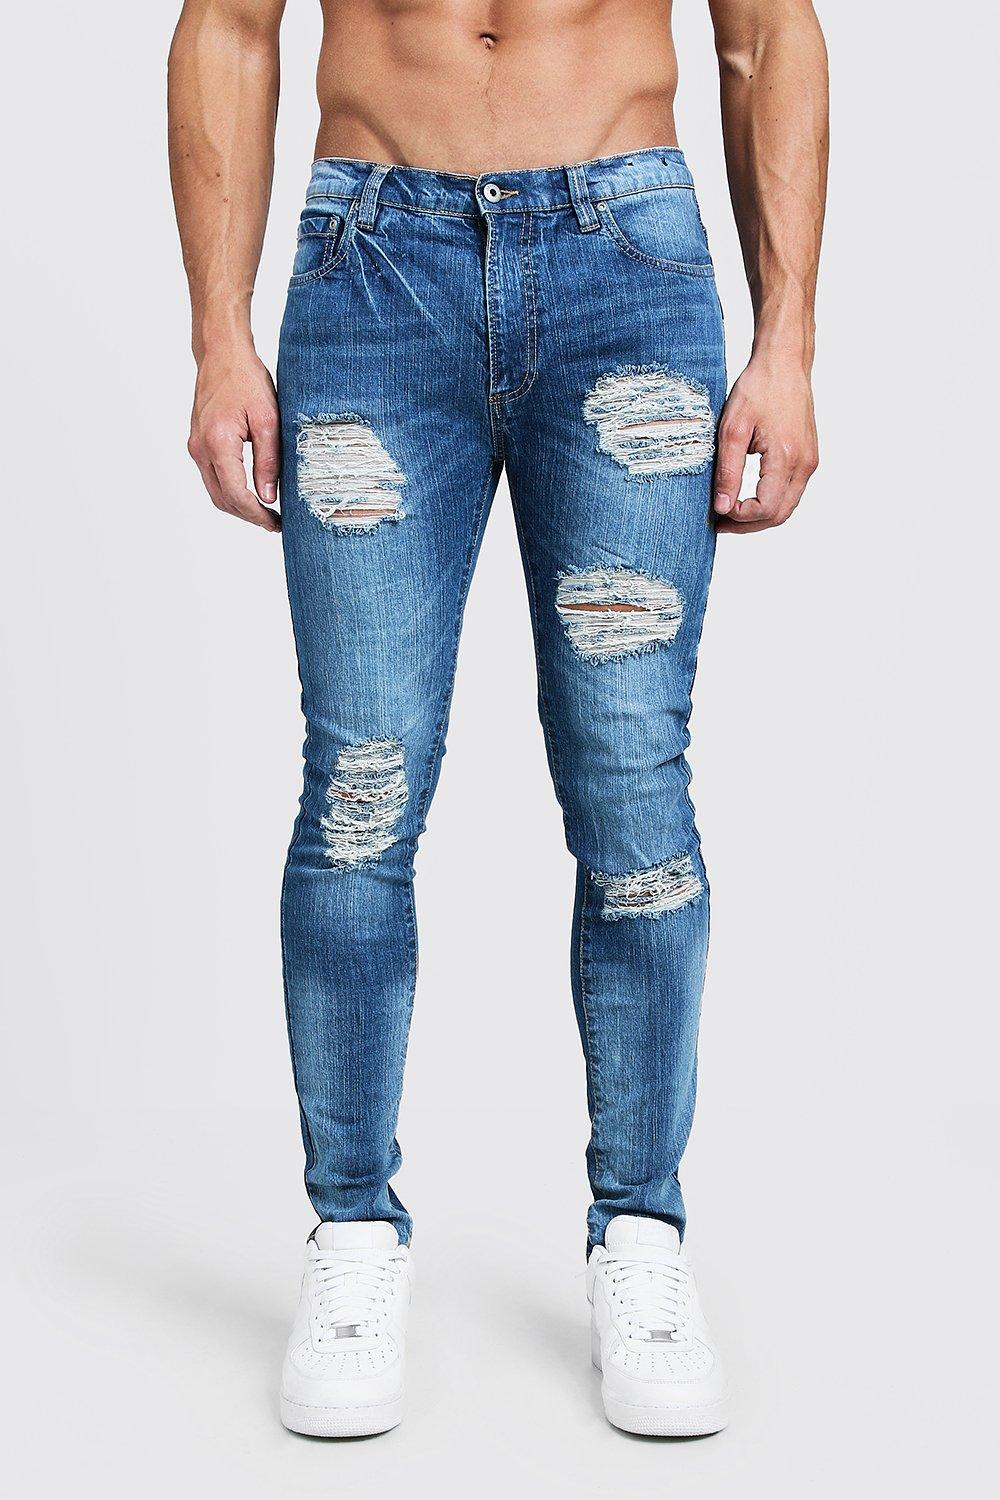 jeans with